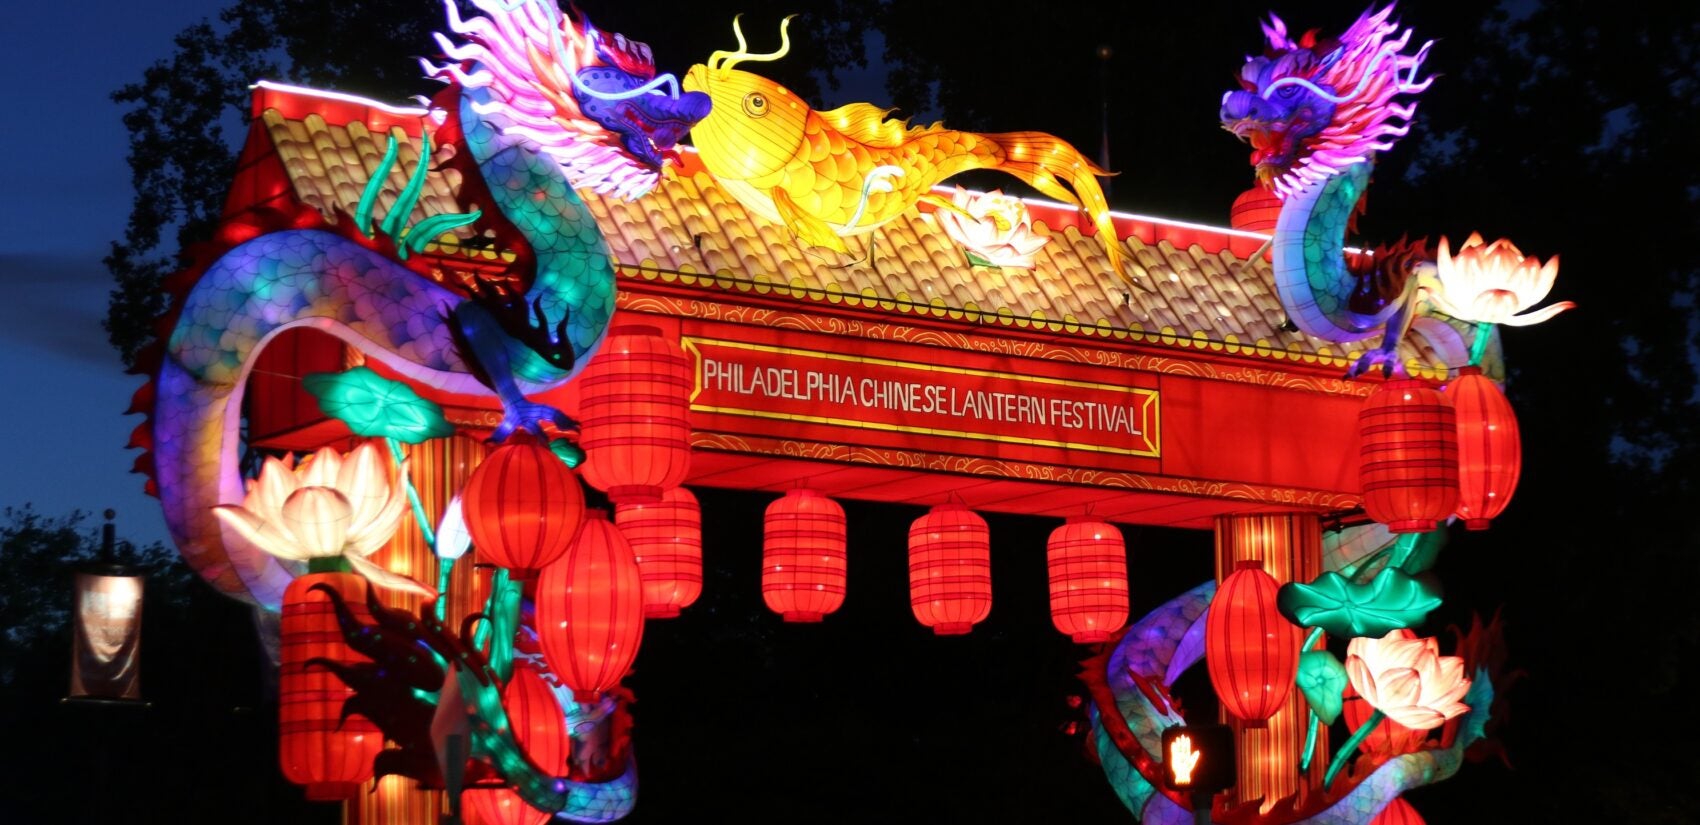 The Chinese Lantern Festival will run through Aug. 18. (Cory Sharber/WHYY)